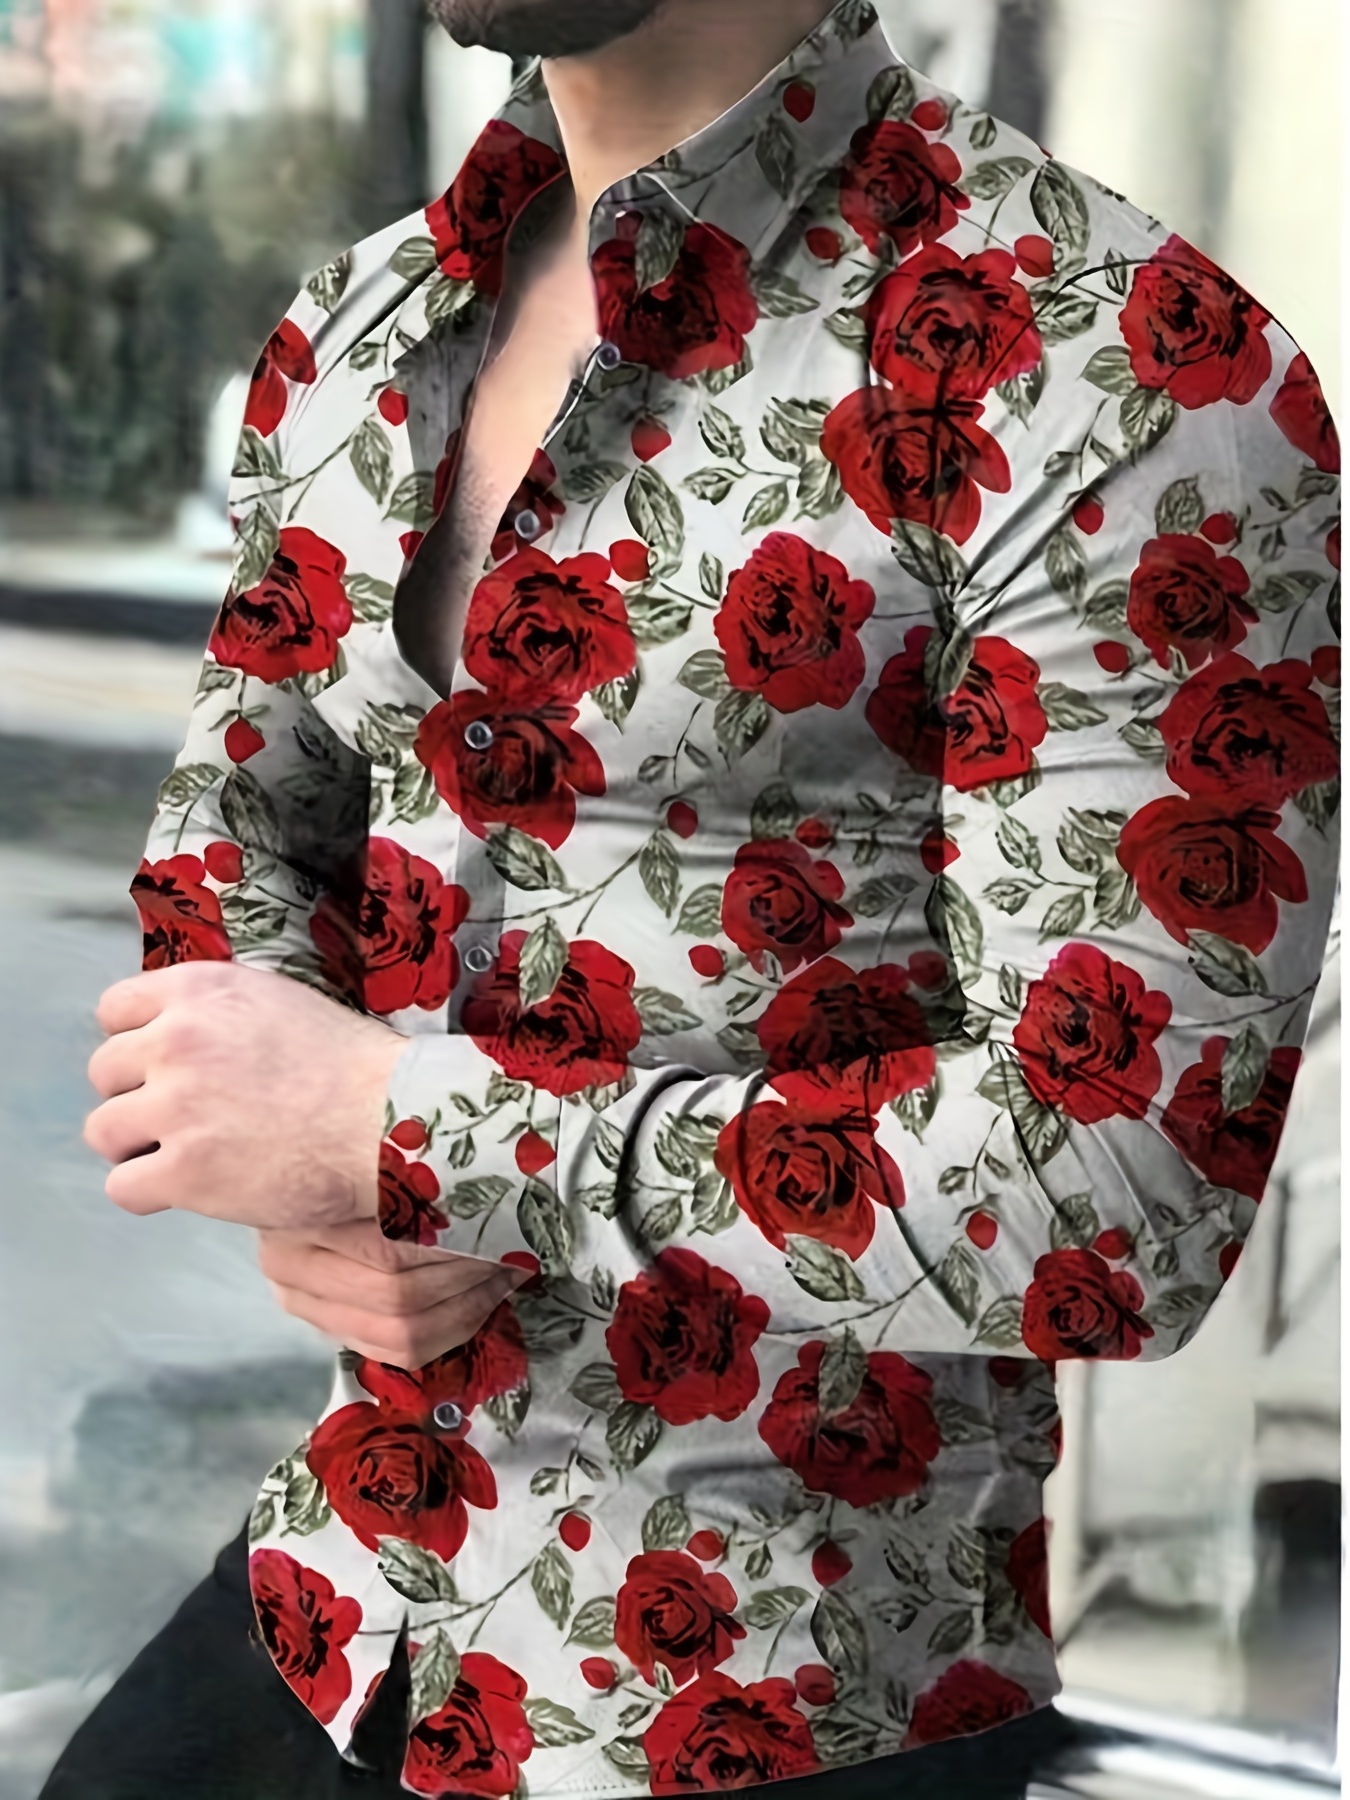 Plus Size Men's Casual Fashion 3D Roses Graphic Print Shirt, Oversized Trendy Long Sleeve Shirt Tops For Big & Tall Males, Men's Clothing, Plus Size